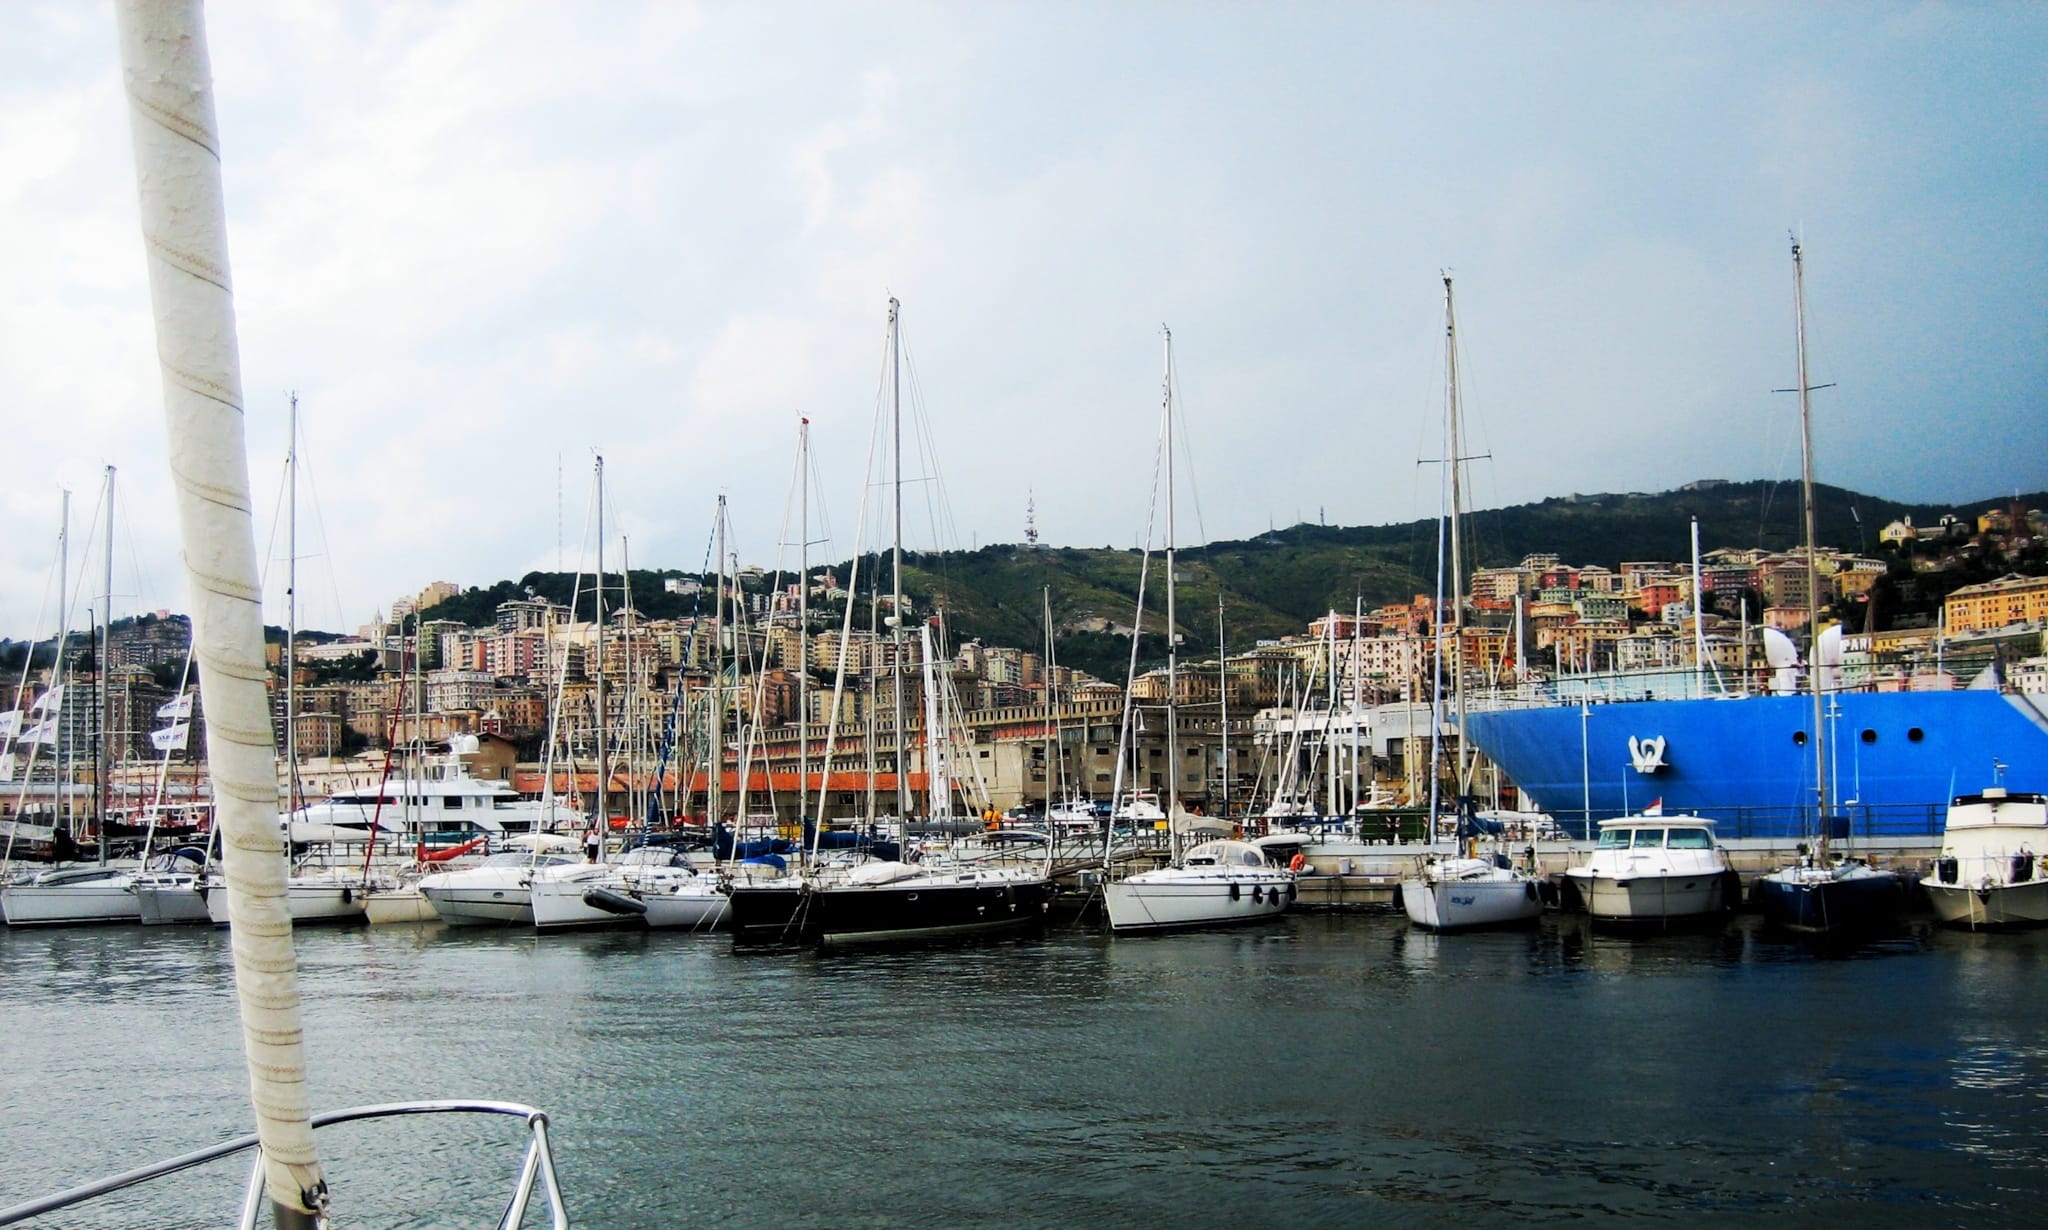 Featured image for “Mediterranean Mooring: What Is It and Why?"